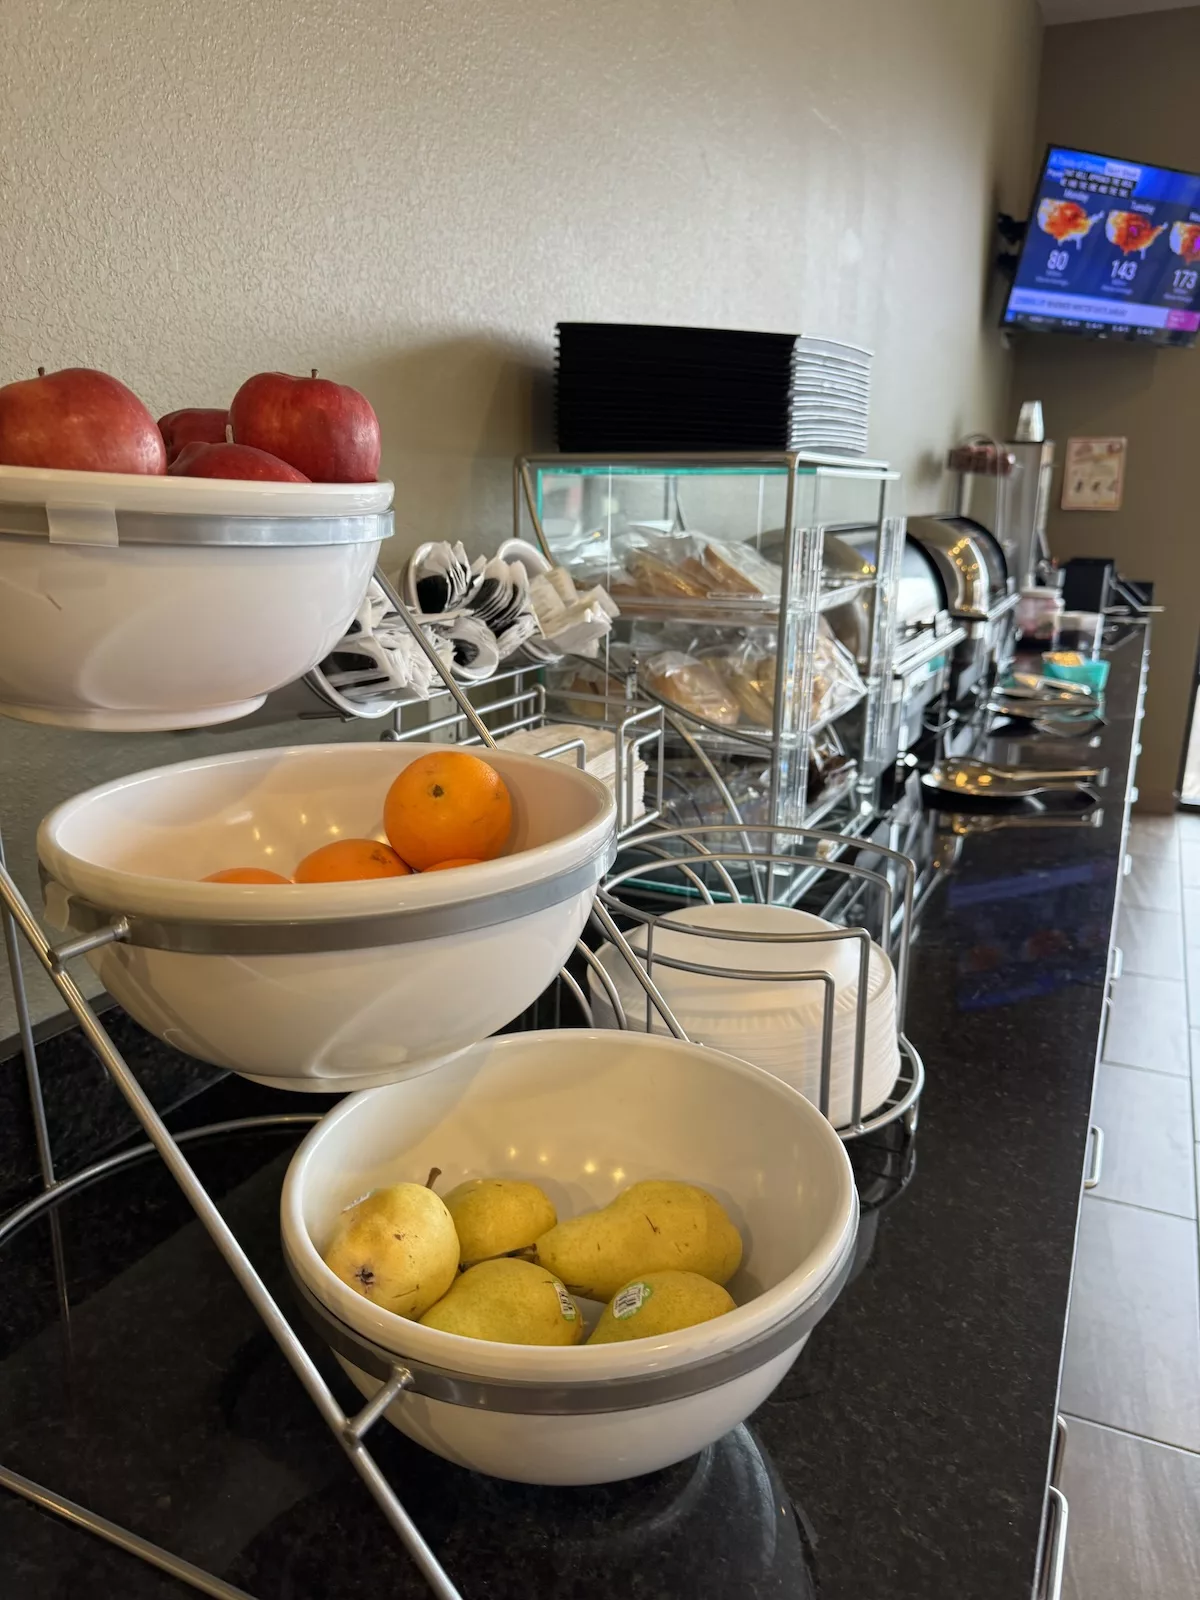 Cobblestone Inn & Suites Continental Breakfast with fresh fruit and hot items - Ashland, WI